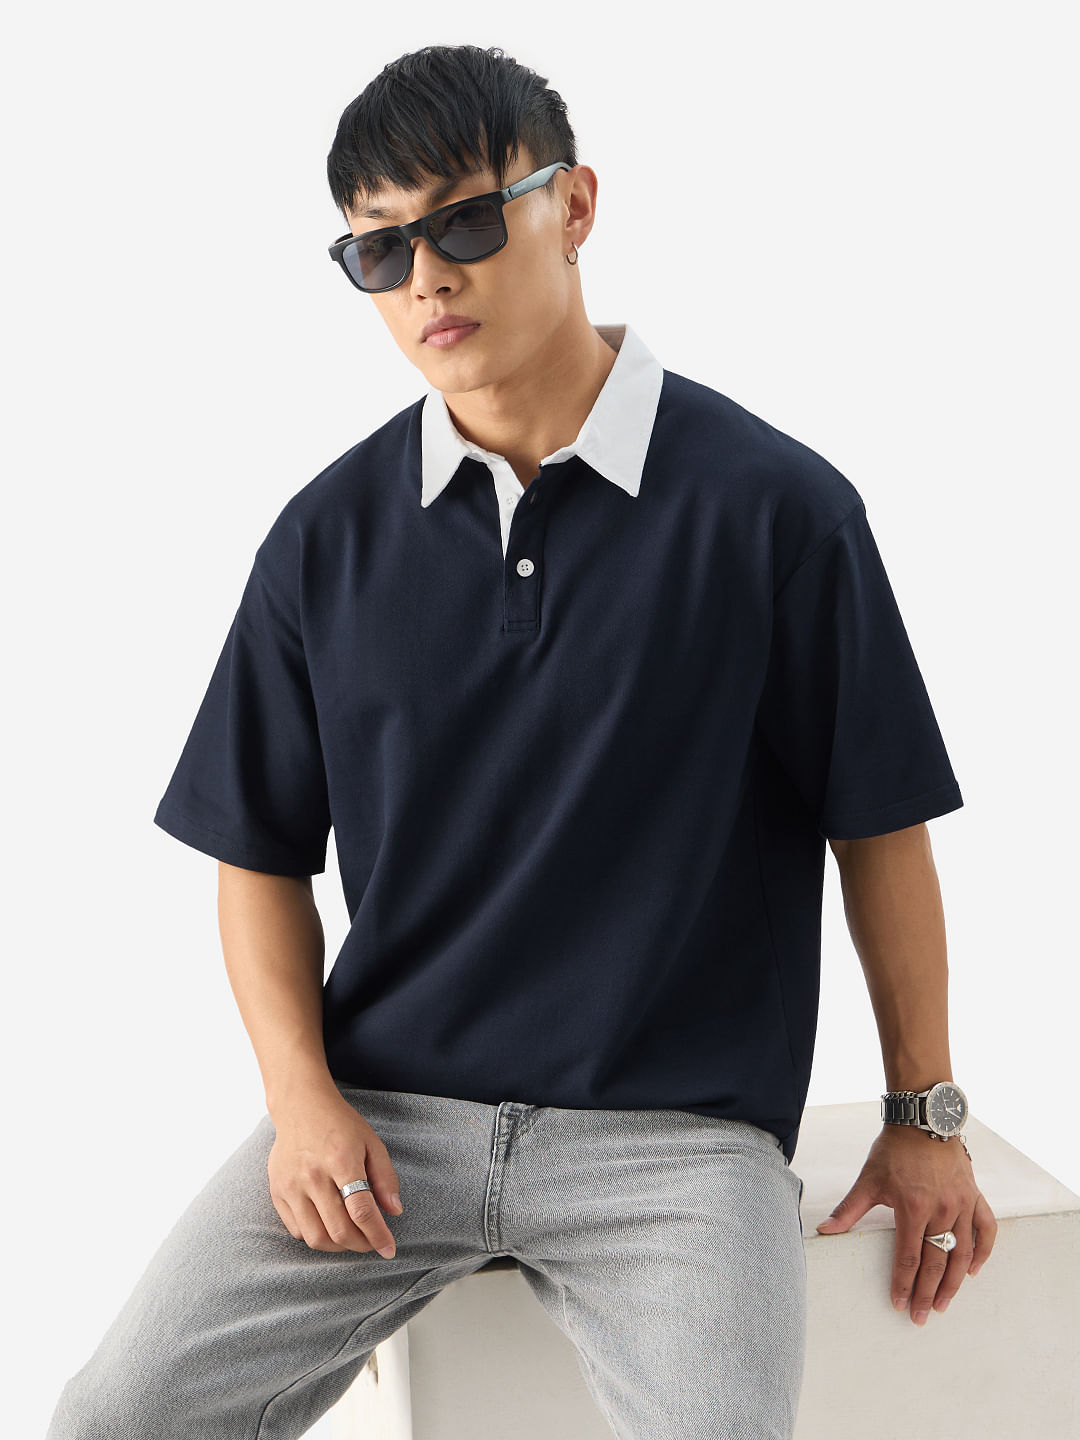 Buy Solid: Navy Blue Men Overized Polos Online